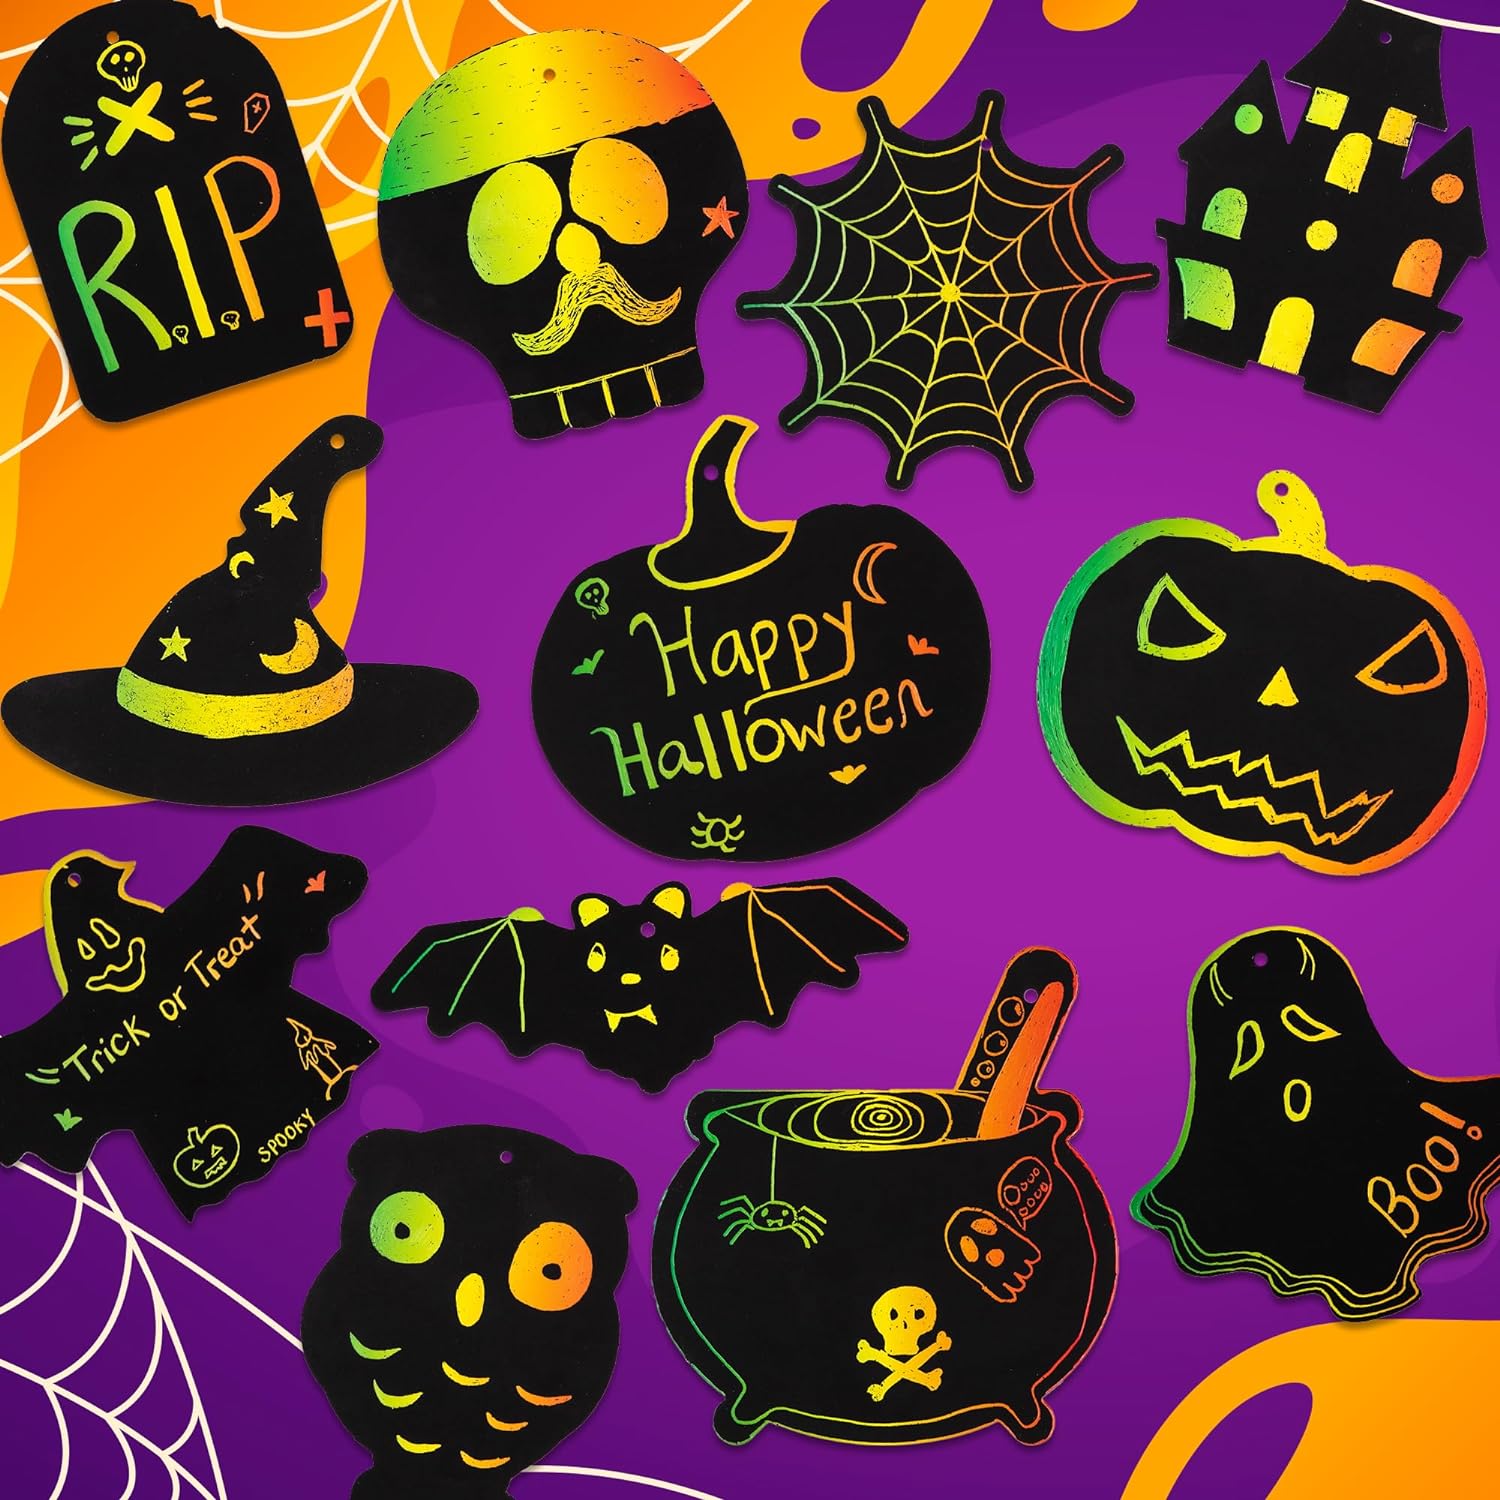 Halloween Scratch Art for Kids - 60 Sets of Scratch Paper - Halloween Crafts (Bulk) with 60 Designs, 60 Sticks, & 60 Pieces of Red String